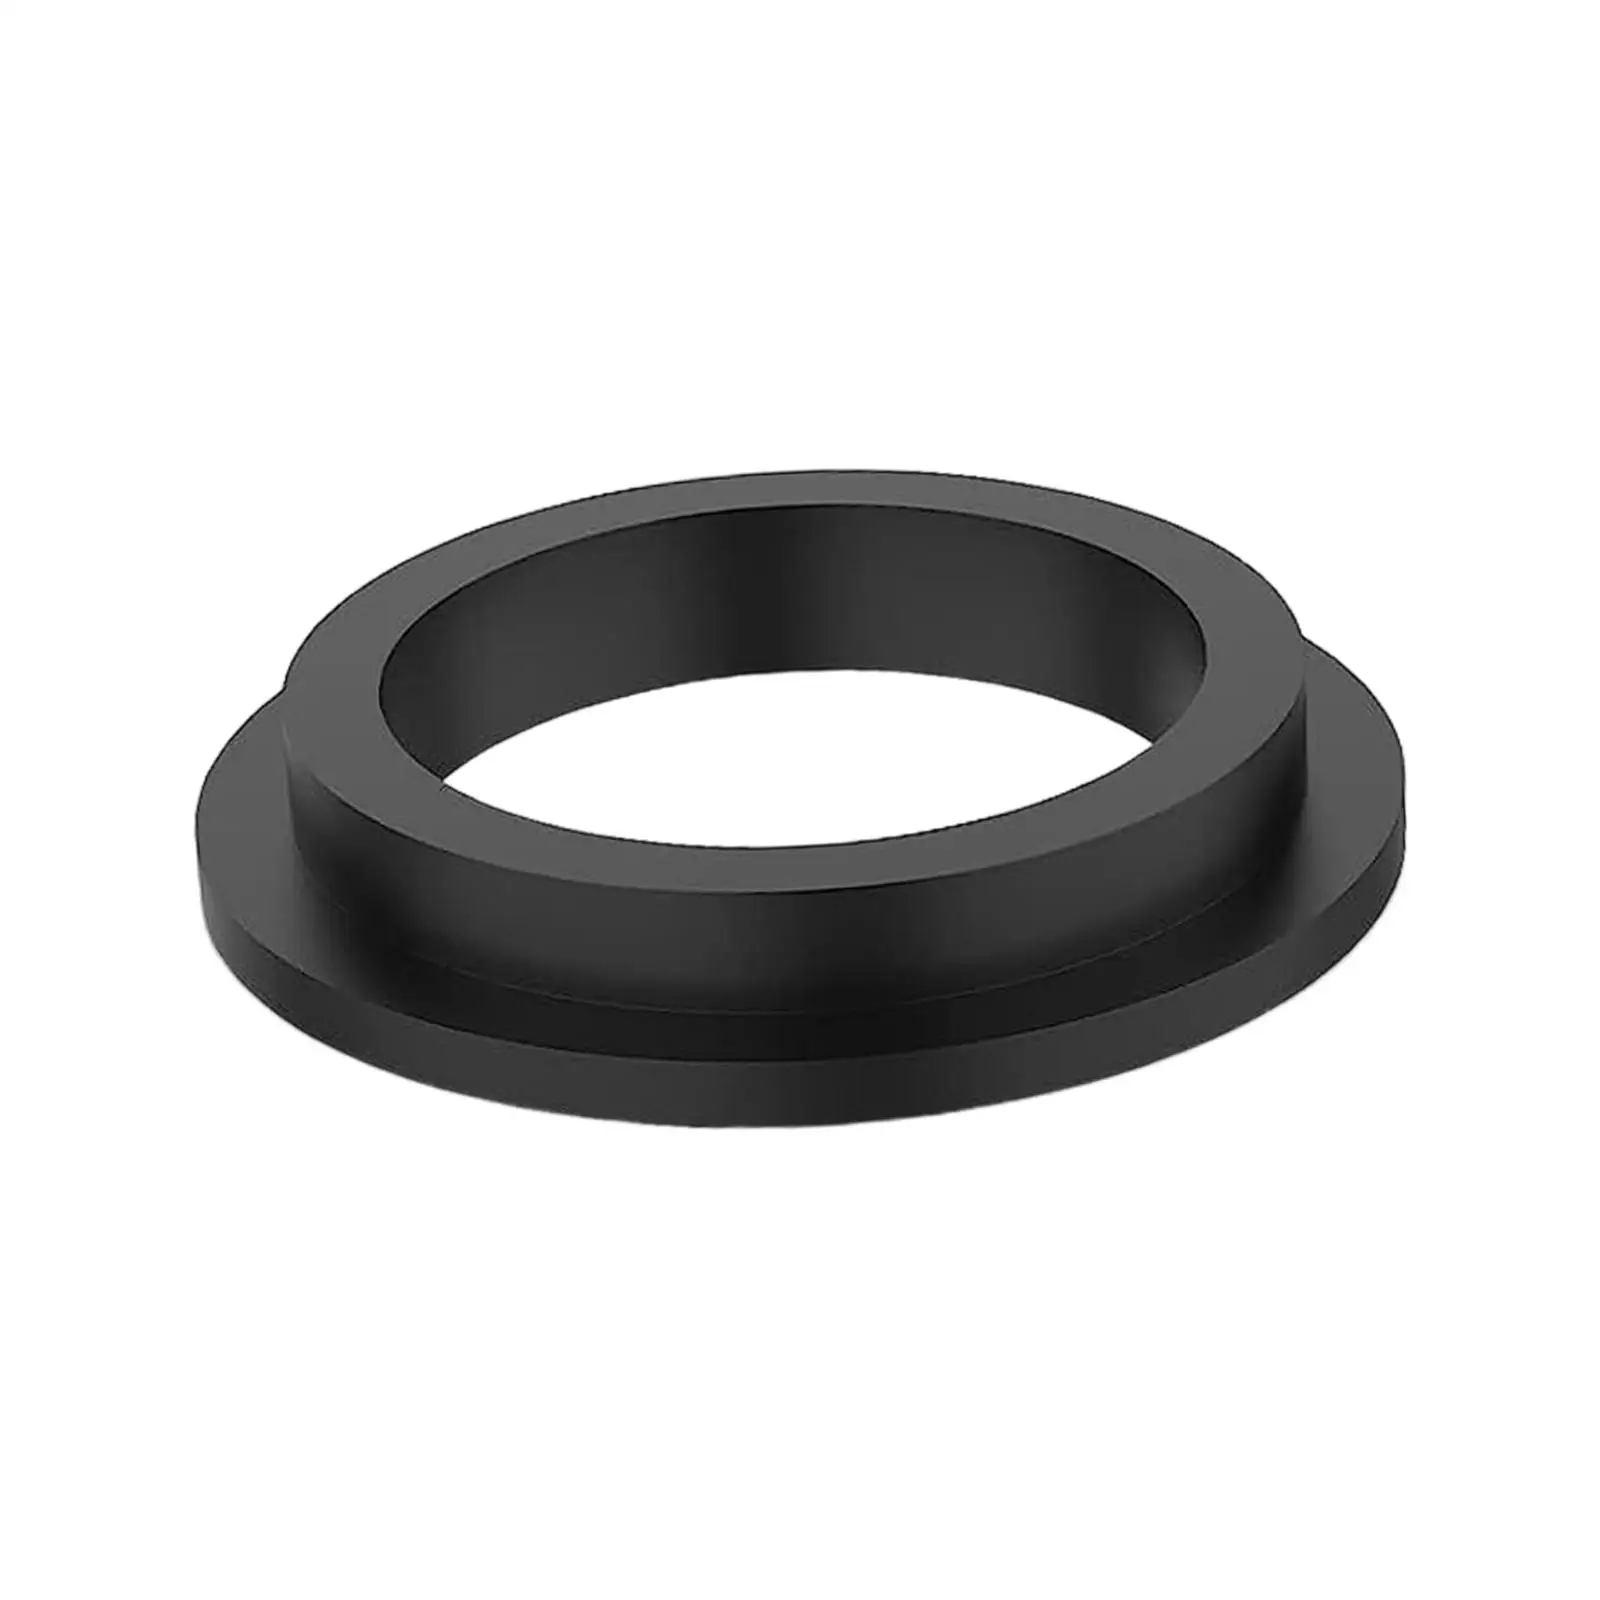 Replacement O Ring for 11412 Sand Filter Pump Motor, Pool Fittings